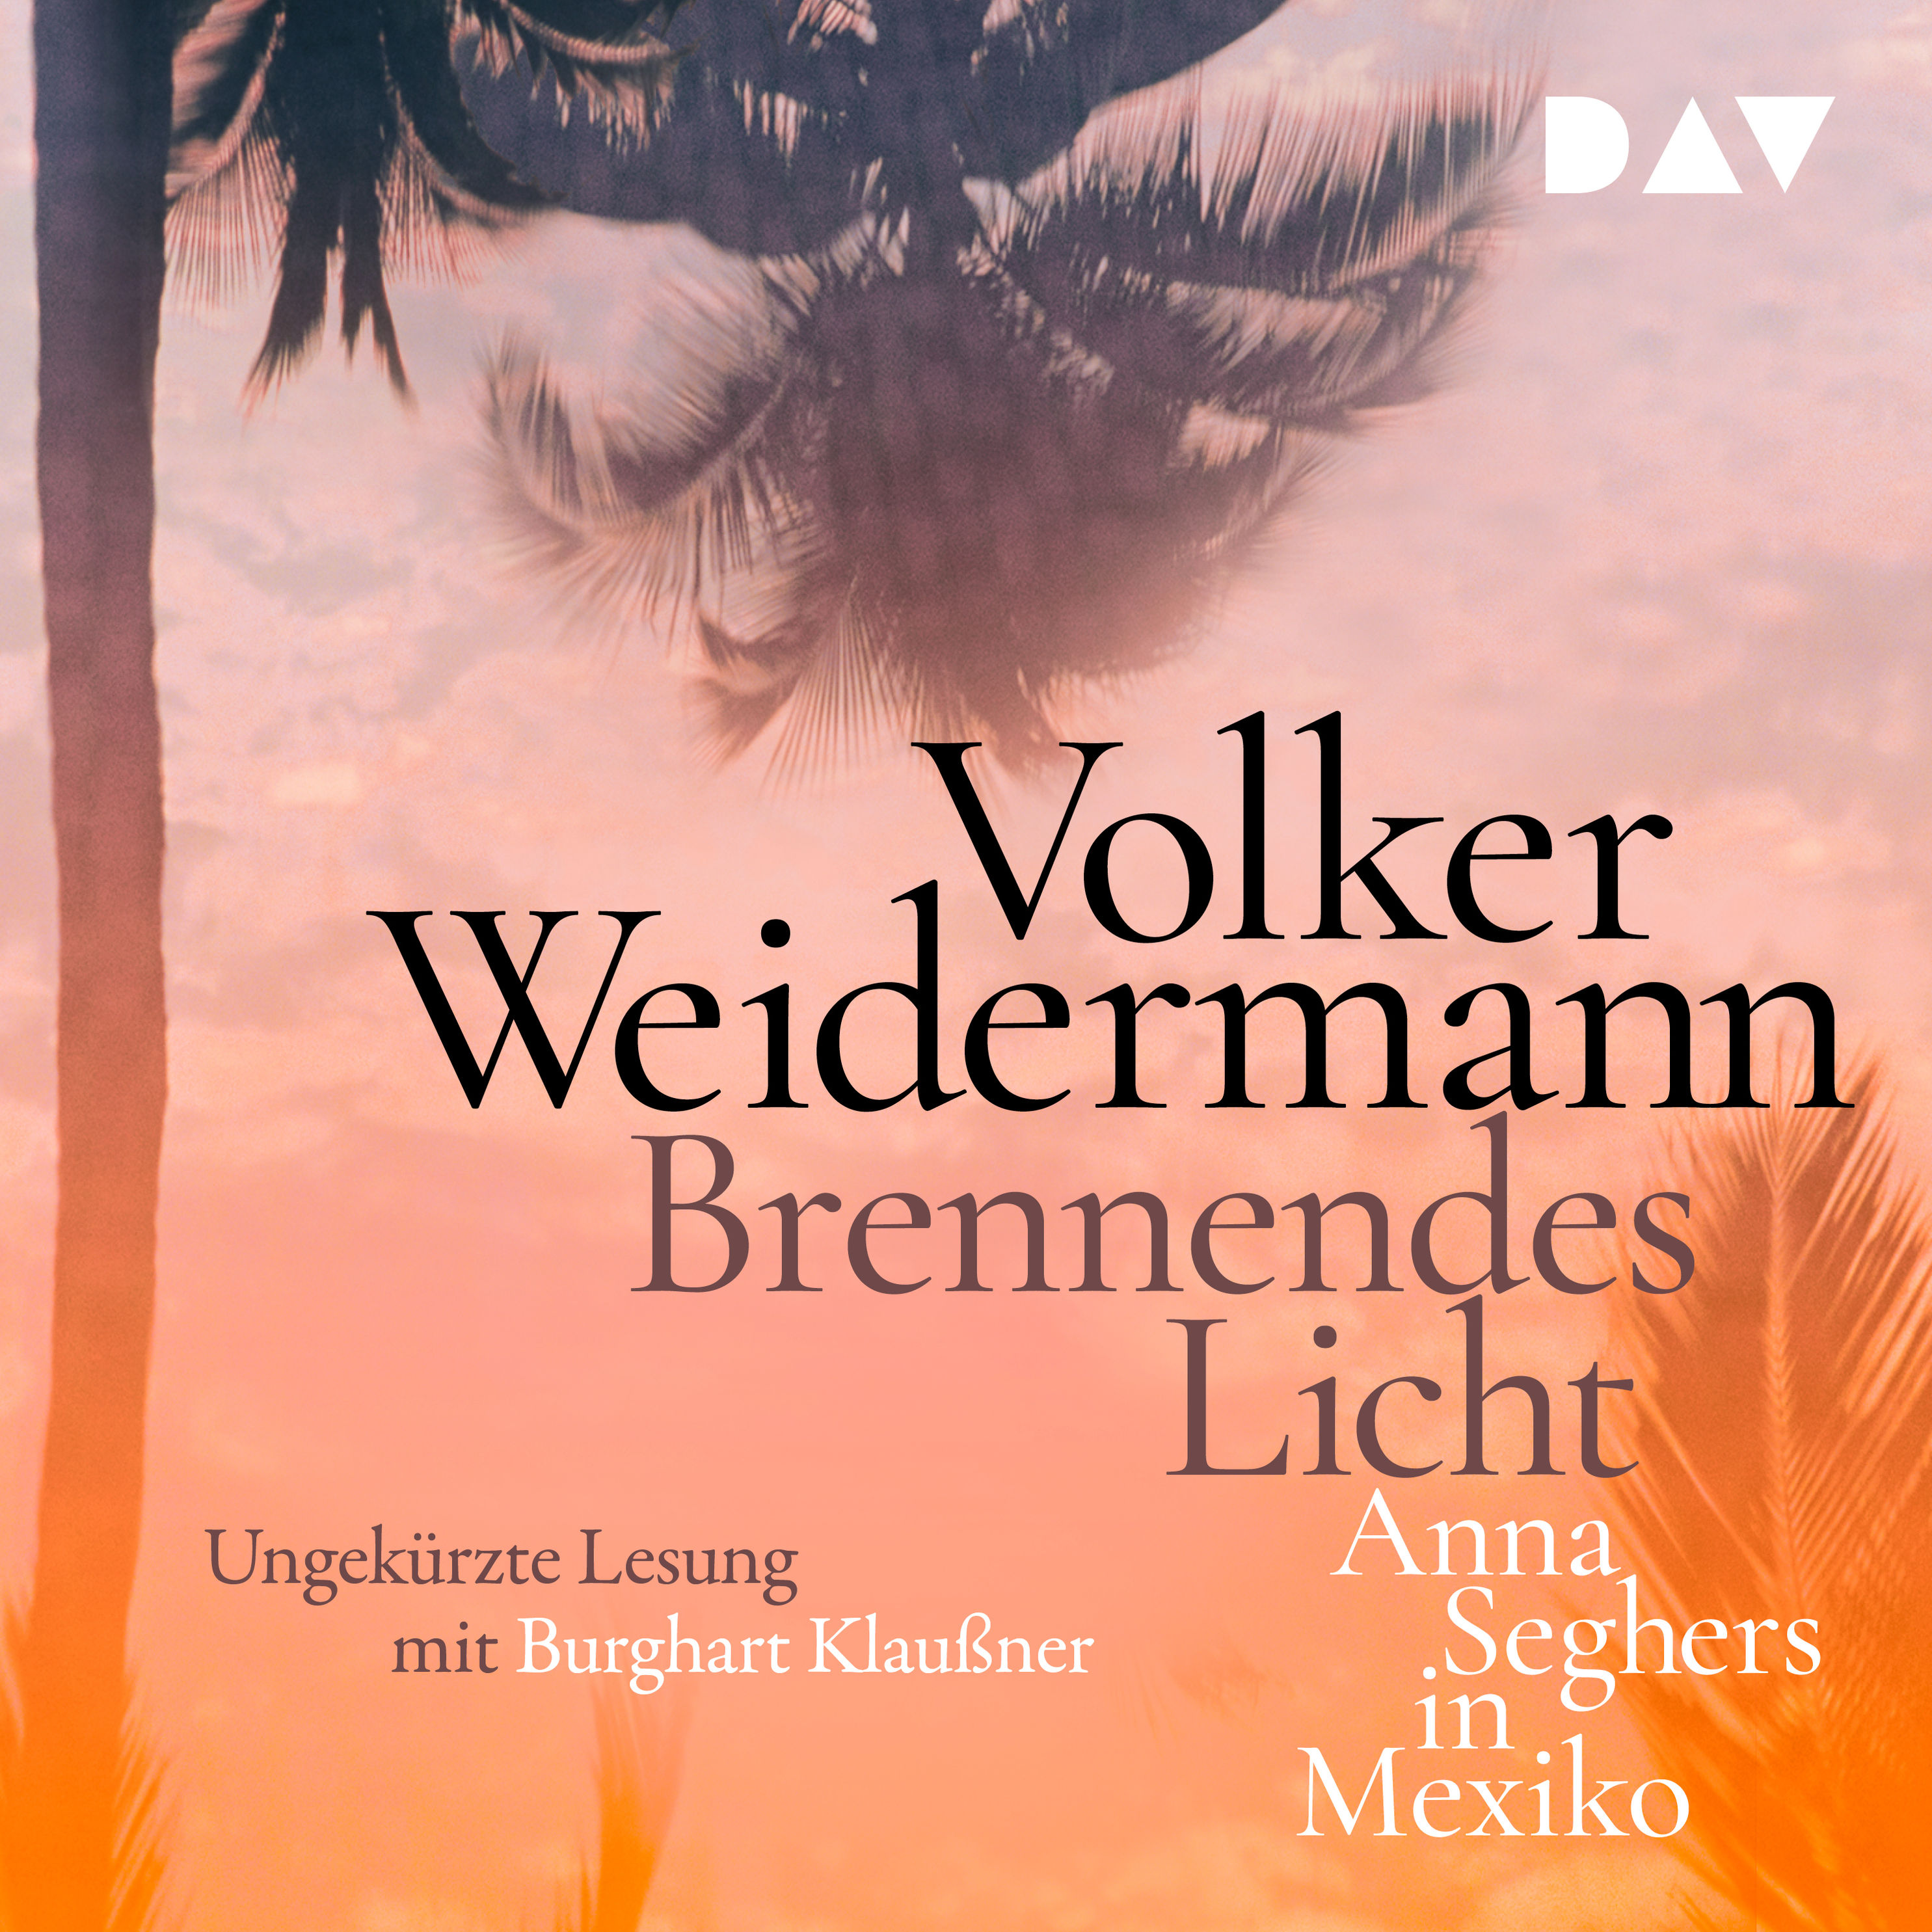 Brennendes Licht. Anna Seghers in Mexiko Hörbuch Download